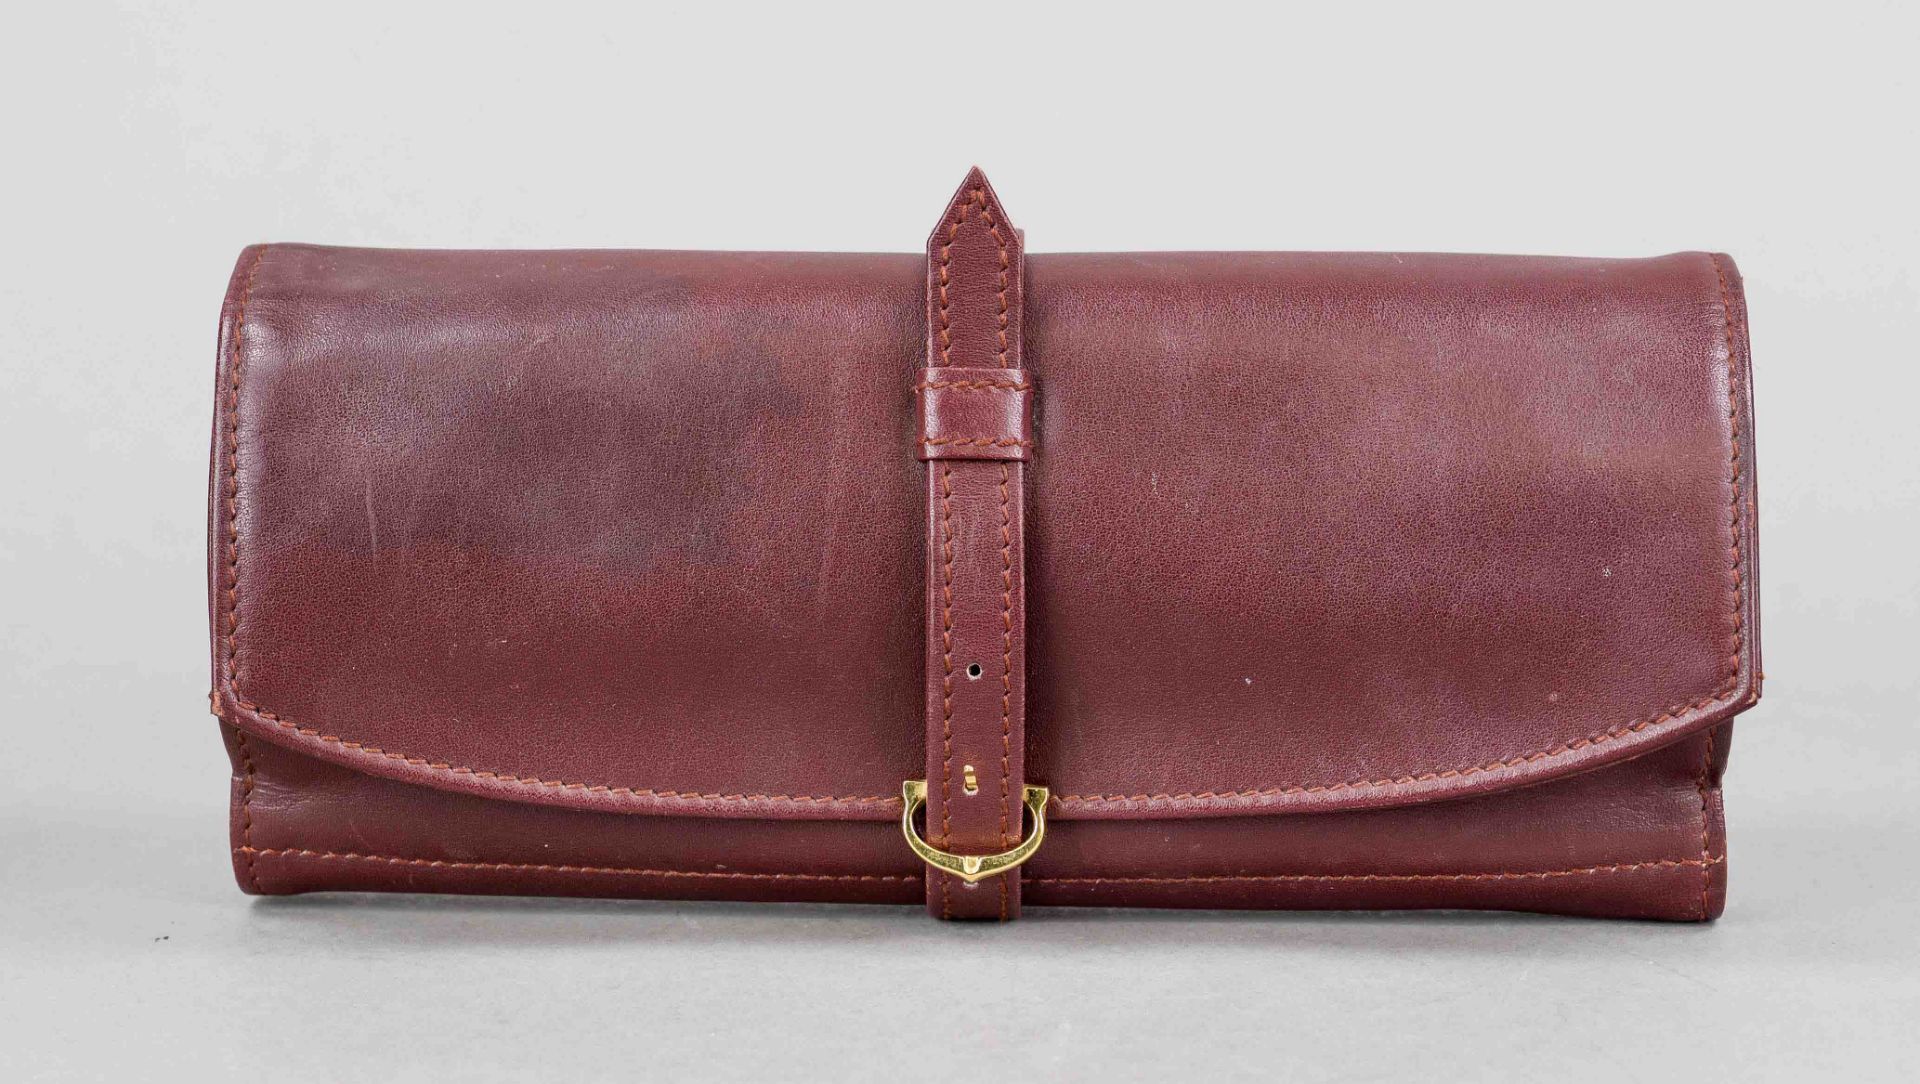 Cartier, leather case (travel case for jewelry?), burgundy smooth leather, gold-coloured hardware,